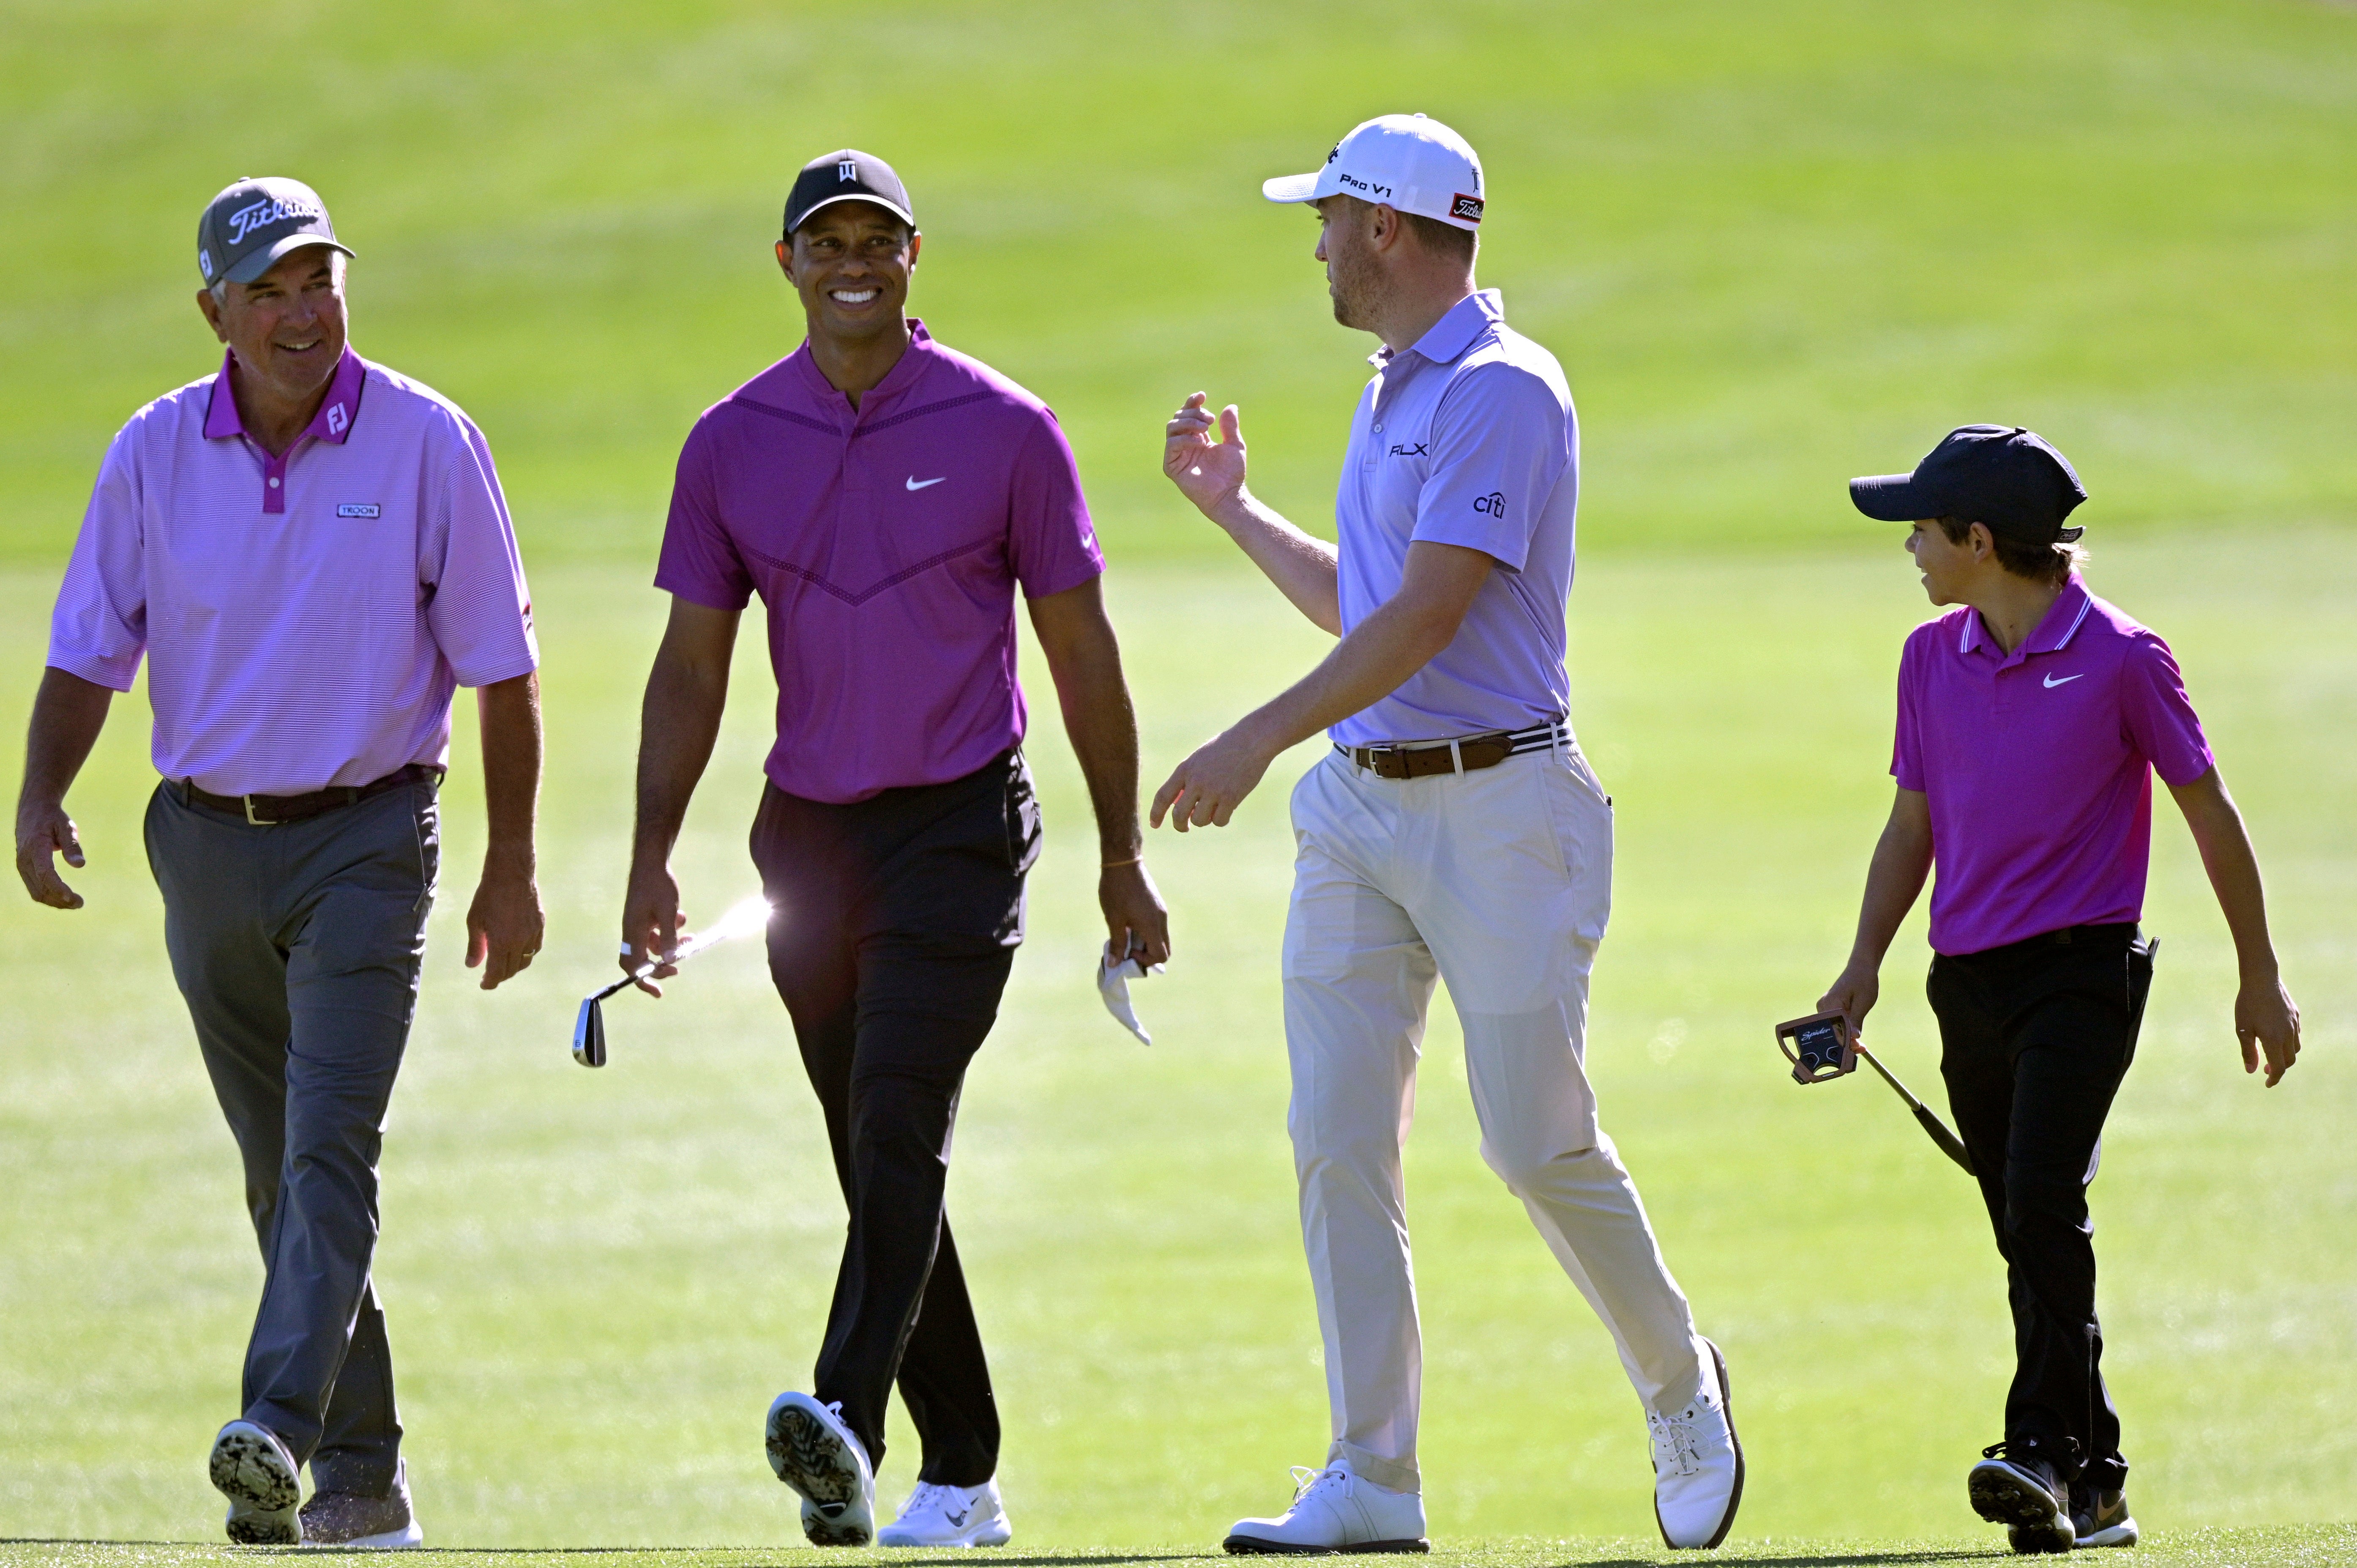 Tiger Woods, second from left, and his son Charlie, right, will play with Justin Thomas, second from right, and his father Mike Thomas the PNC Championship (Phelan M. Ebenhack/AP)